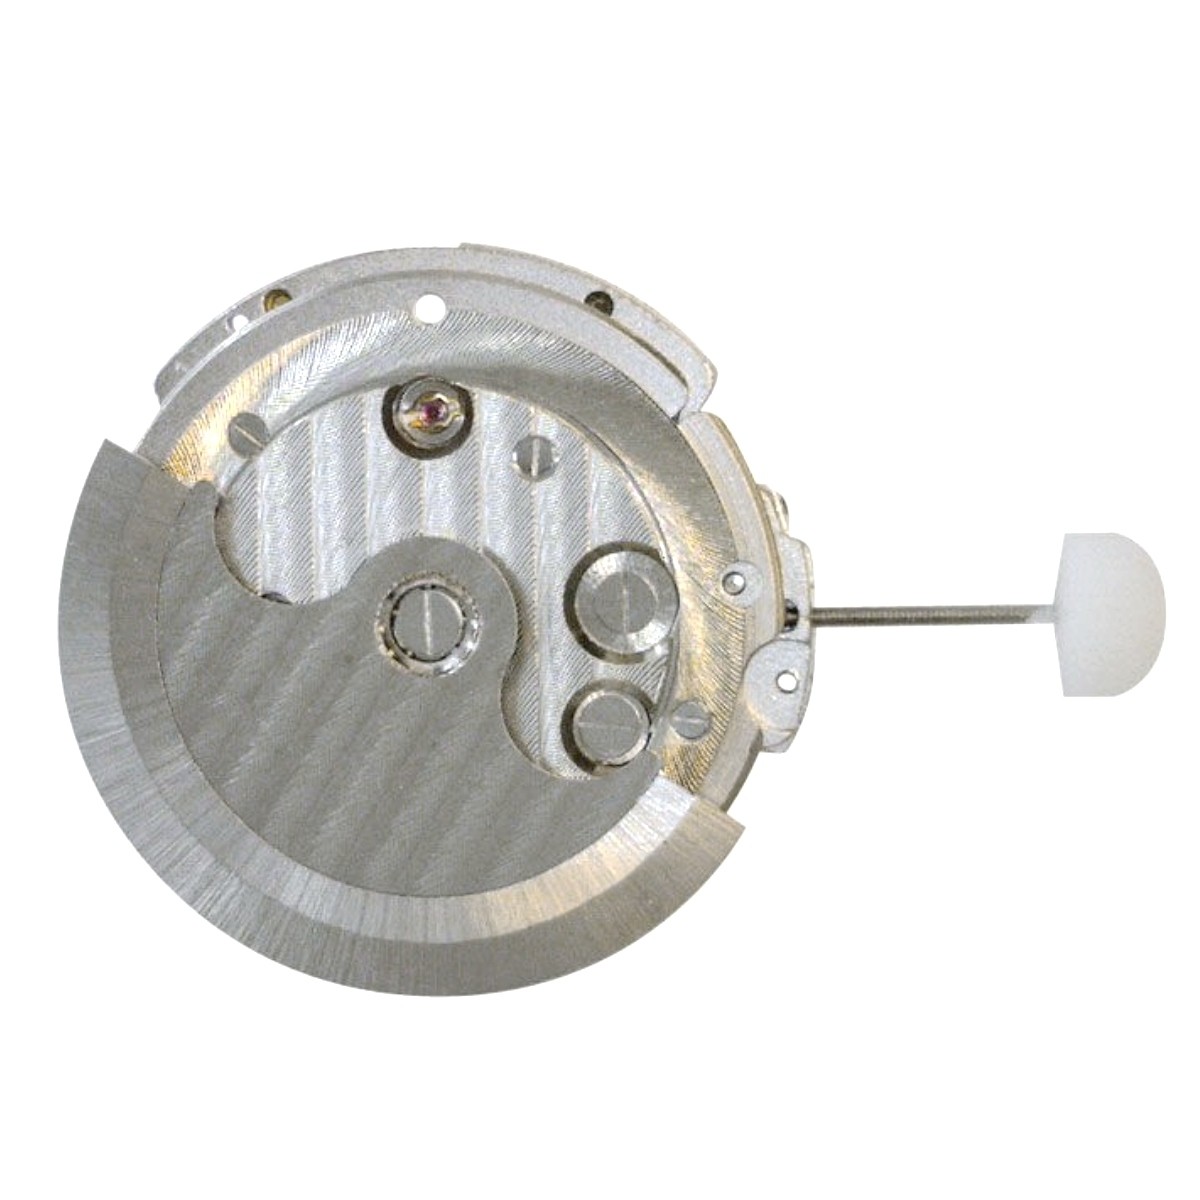 Automatic watch movement R30 dual time incl. watch hands - Order chinese  watch movements online